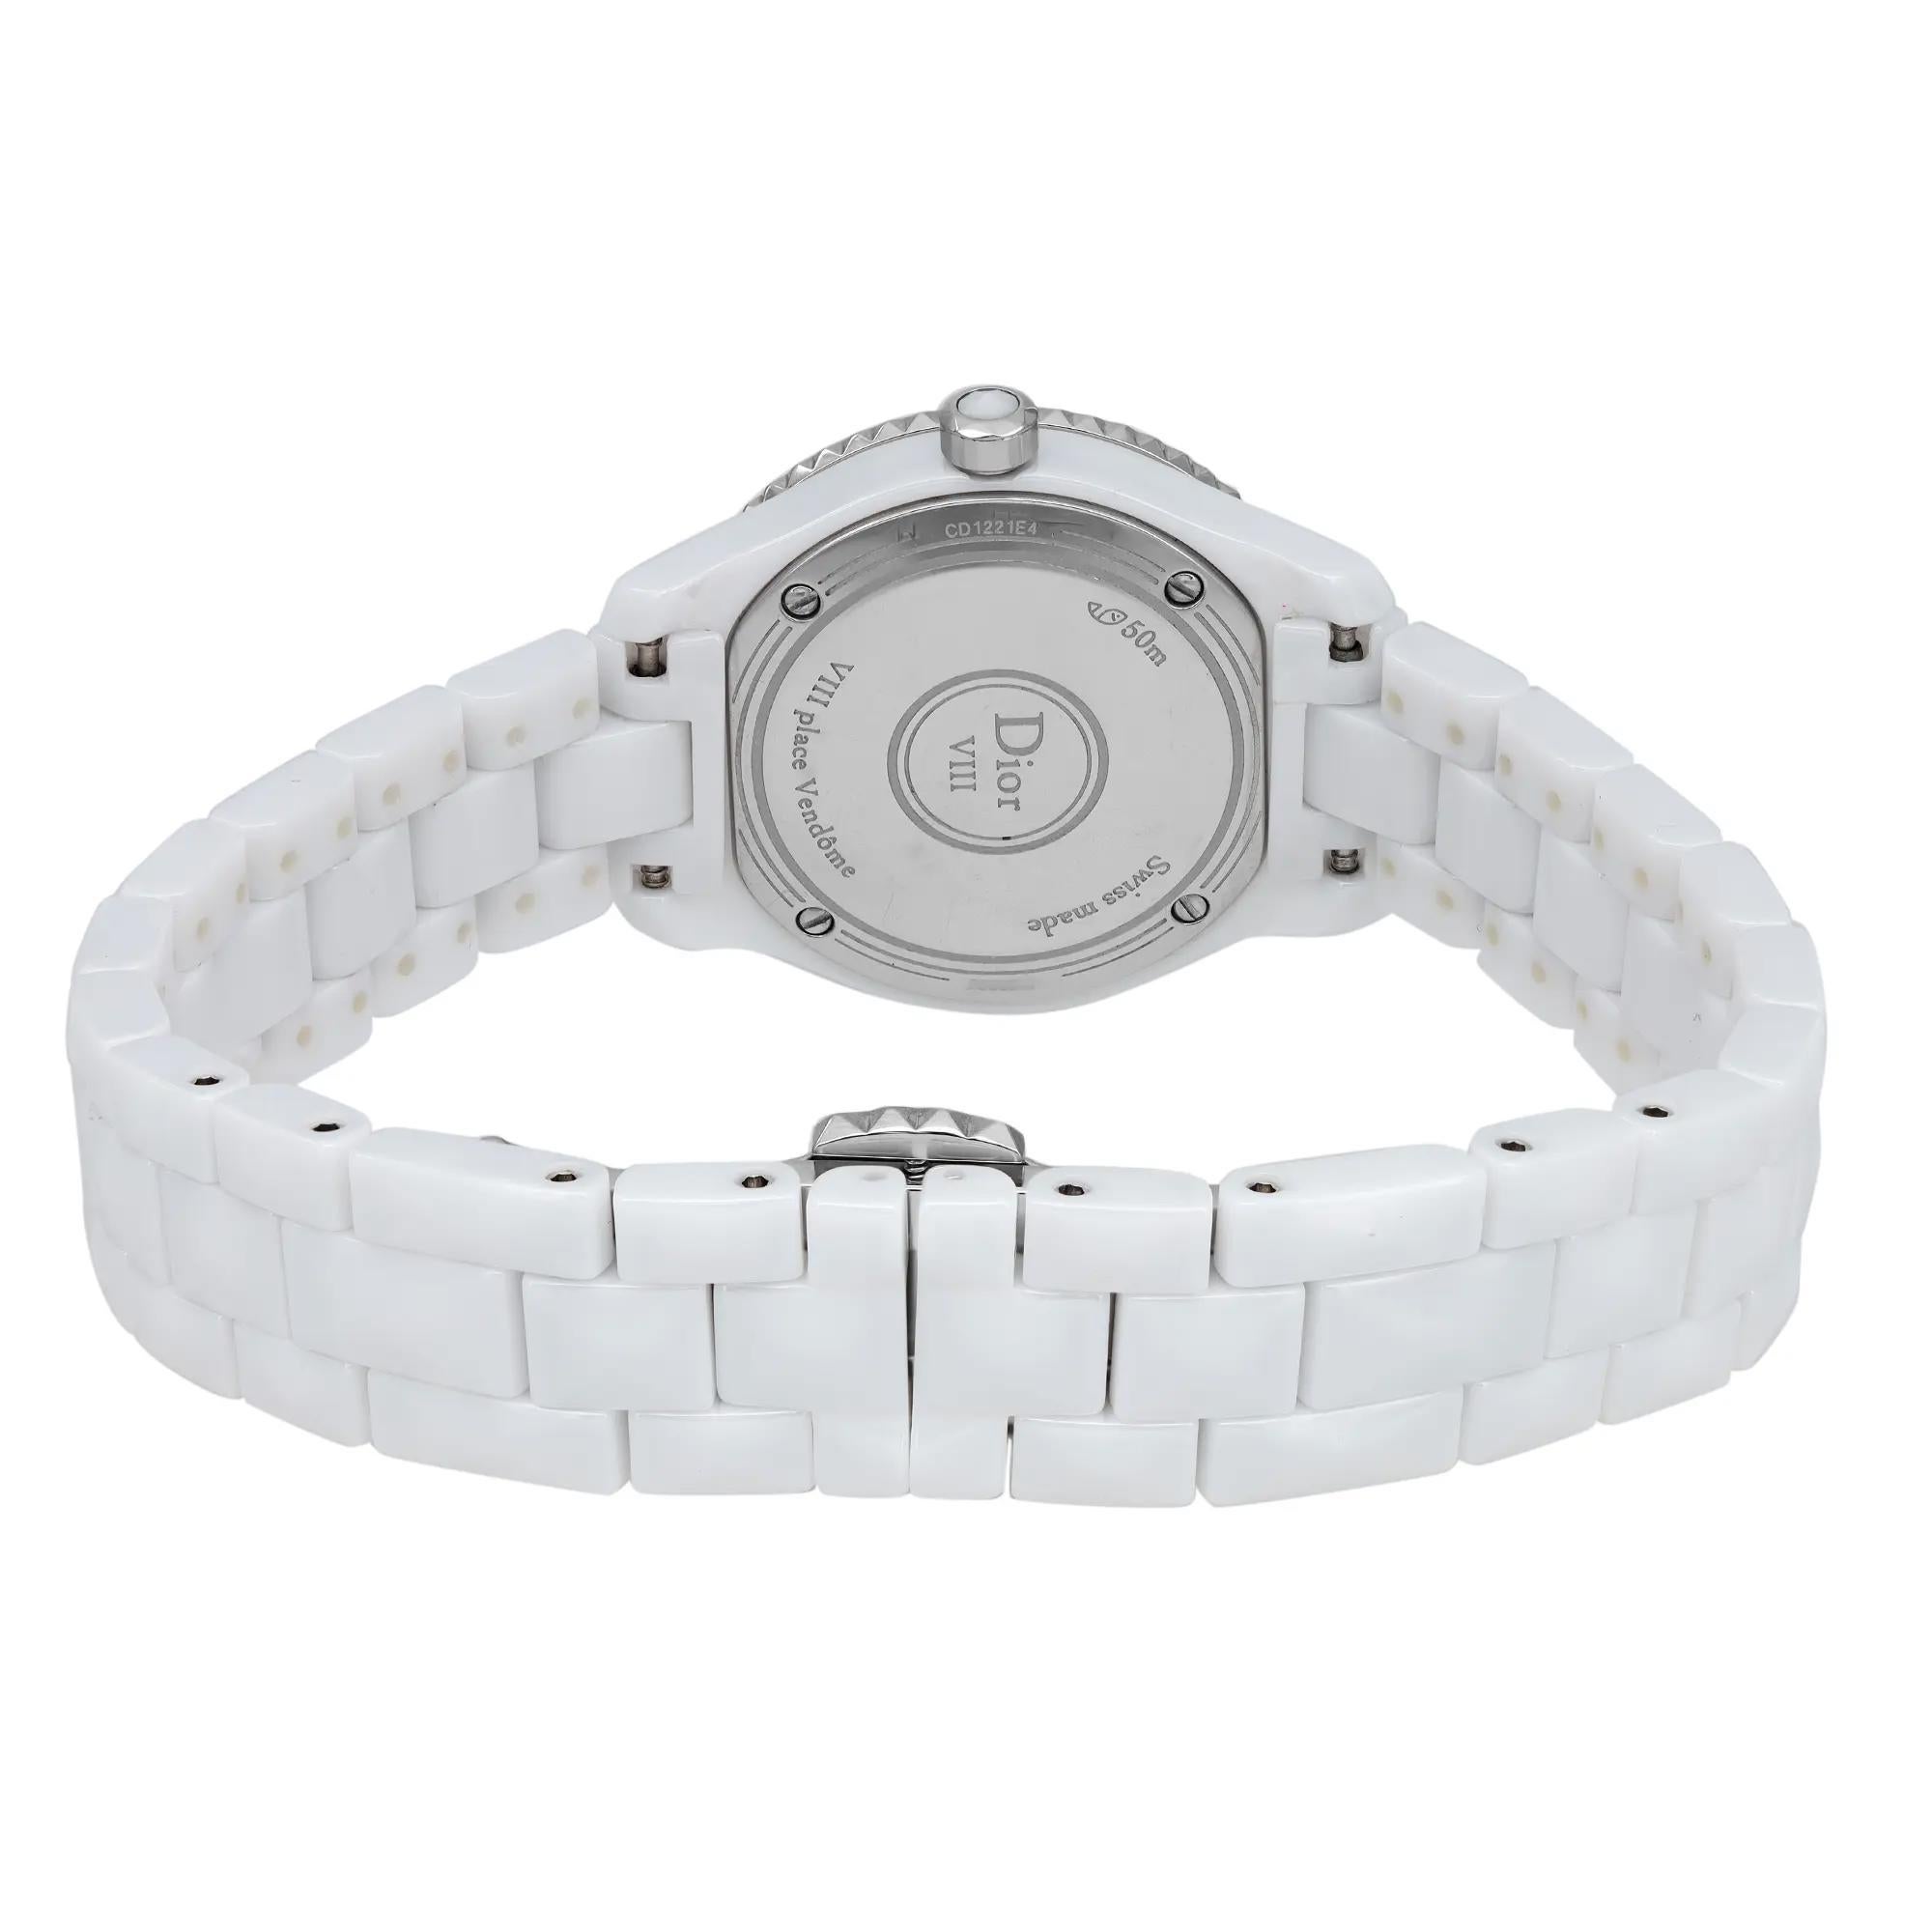 Christian Dior VIII Hi Tech Ceramic MOP Dial Quartz Ladies Watch CD1221E4C001 In Good Condition For Sale In New York, NY